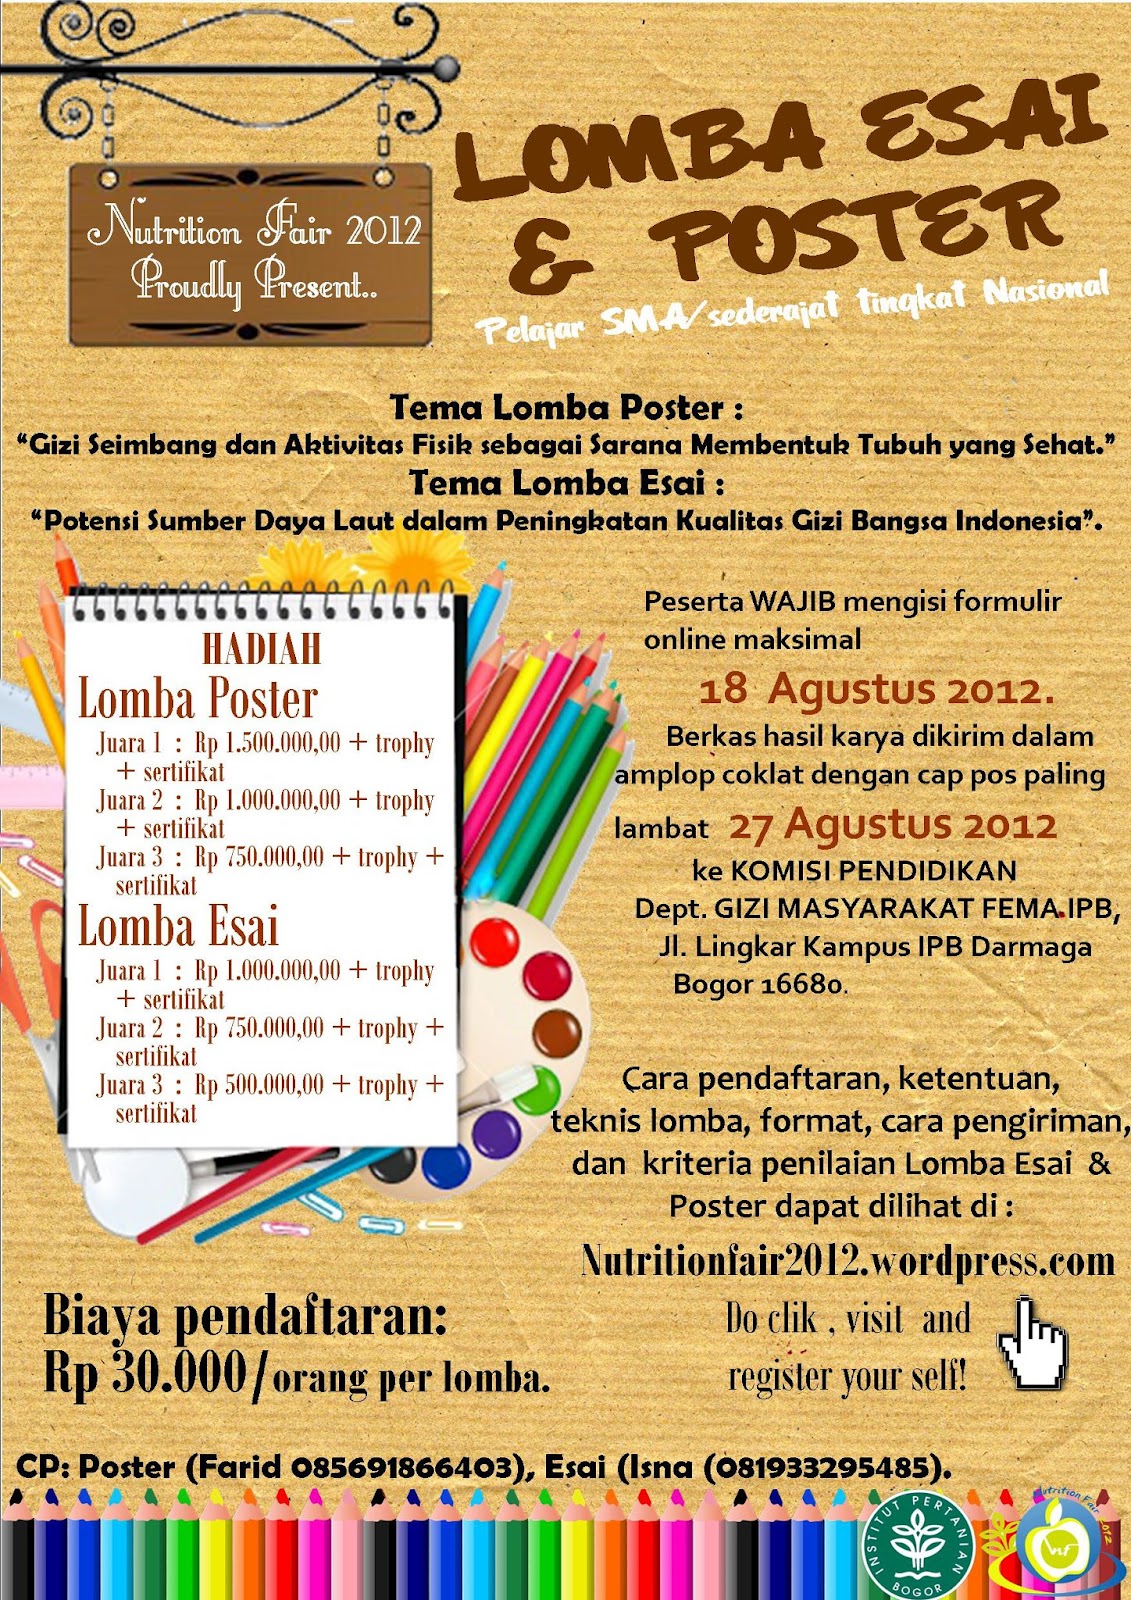 Juni 2012 - INFO LOMBA 2015 Up To Date